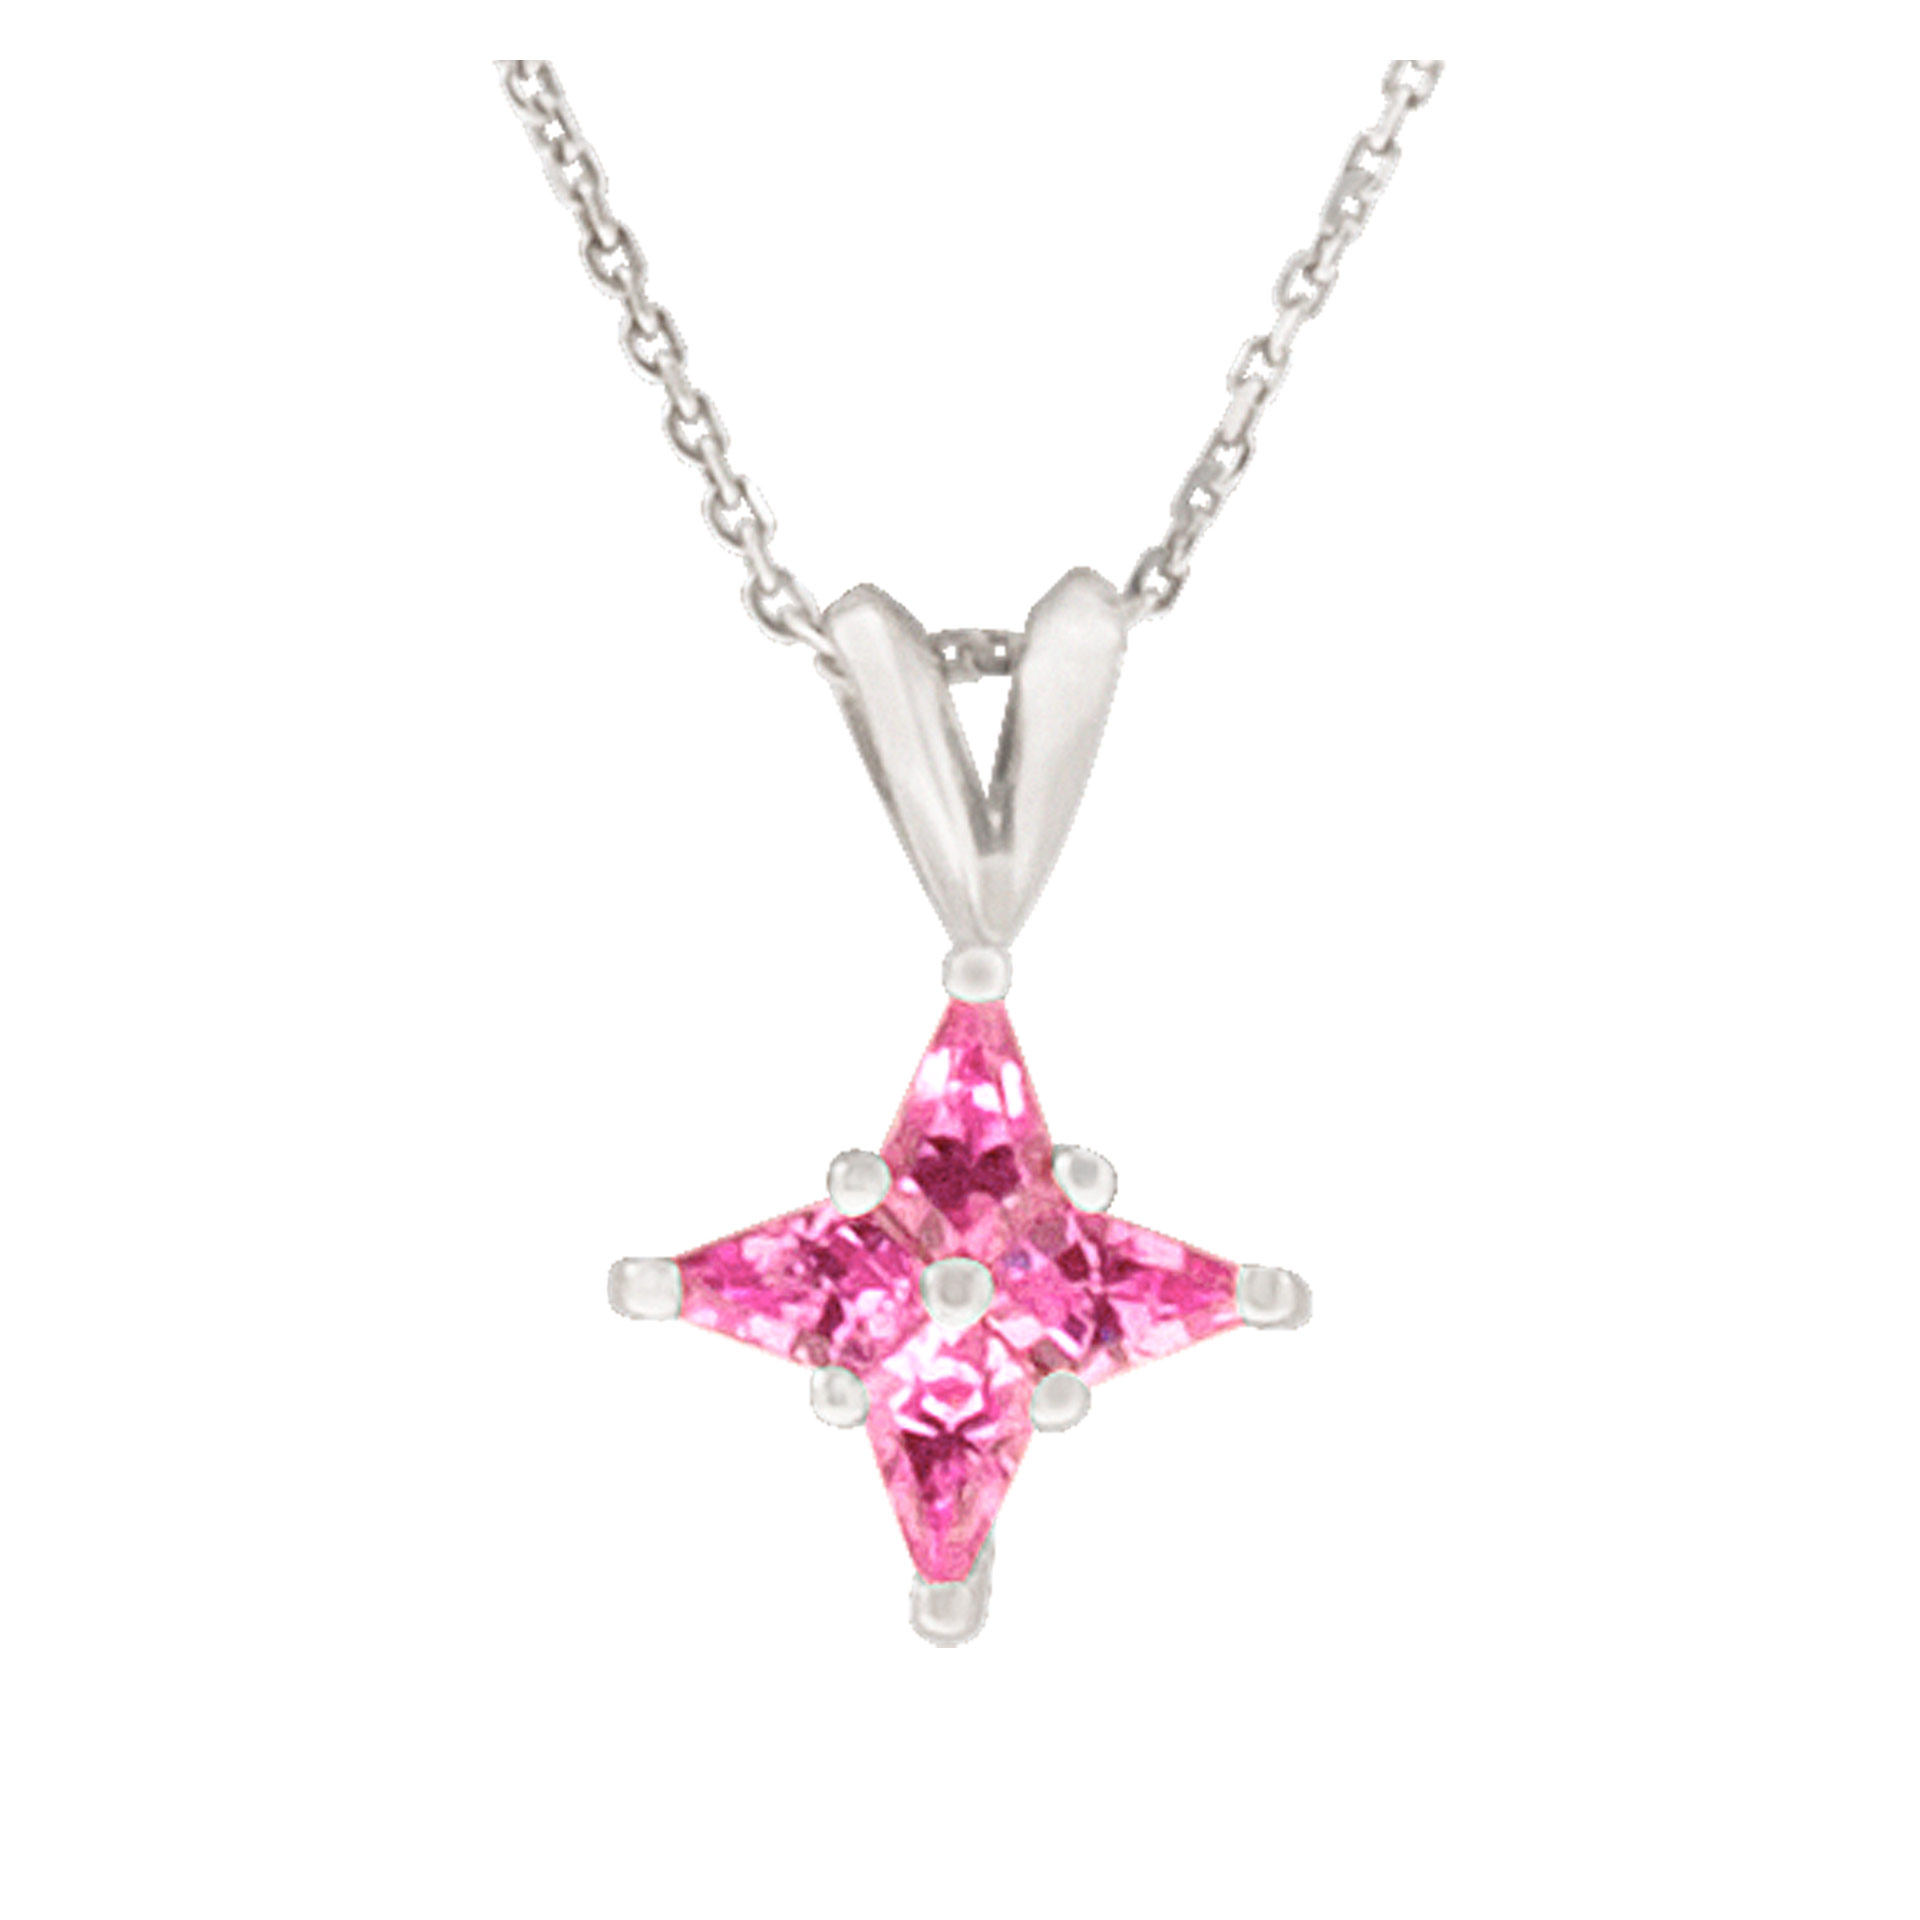 Pink star/flower necklace in 18k white gold with chain image 1